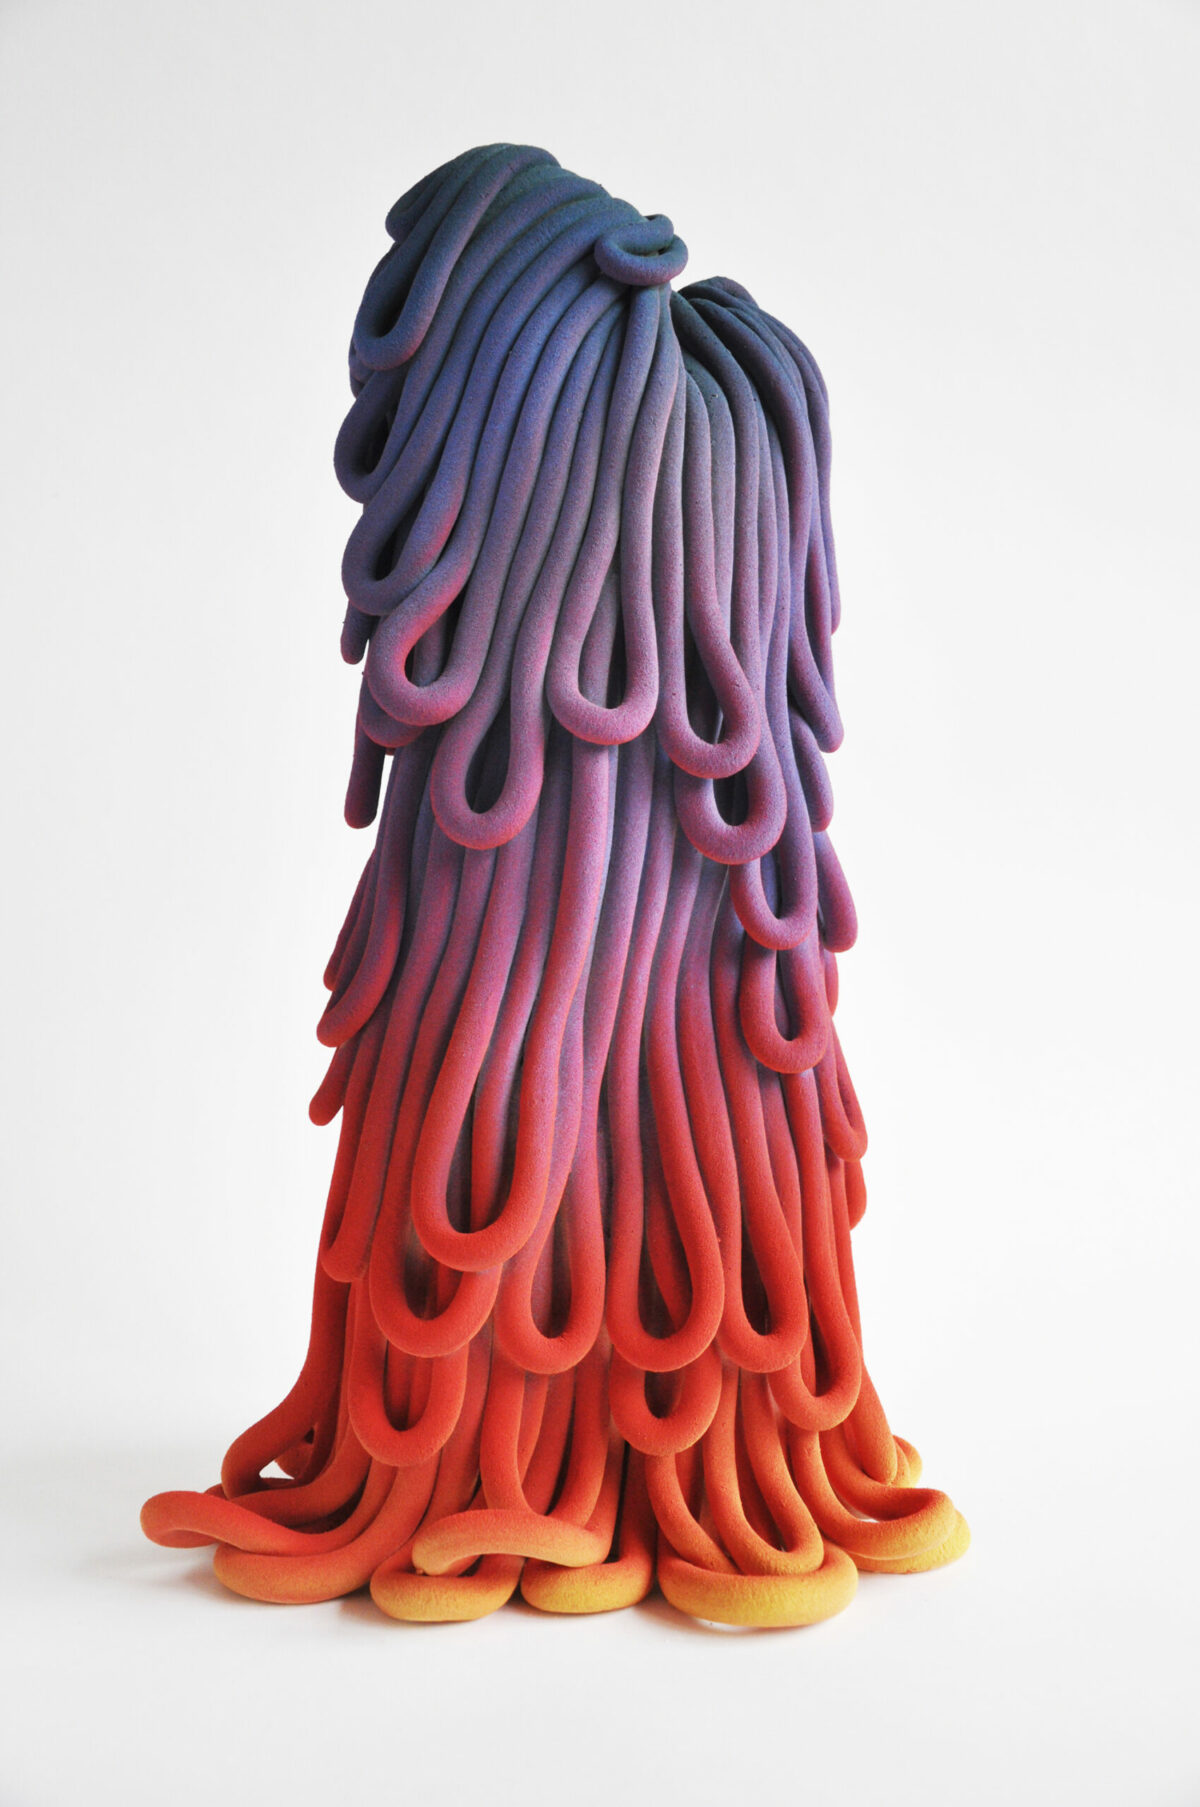 Mesmerizing Abstract Ceramic Sculptures Composed Of Multiples Loops Tentacles And Coils By Claire Lindner 6